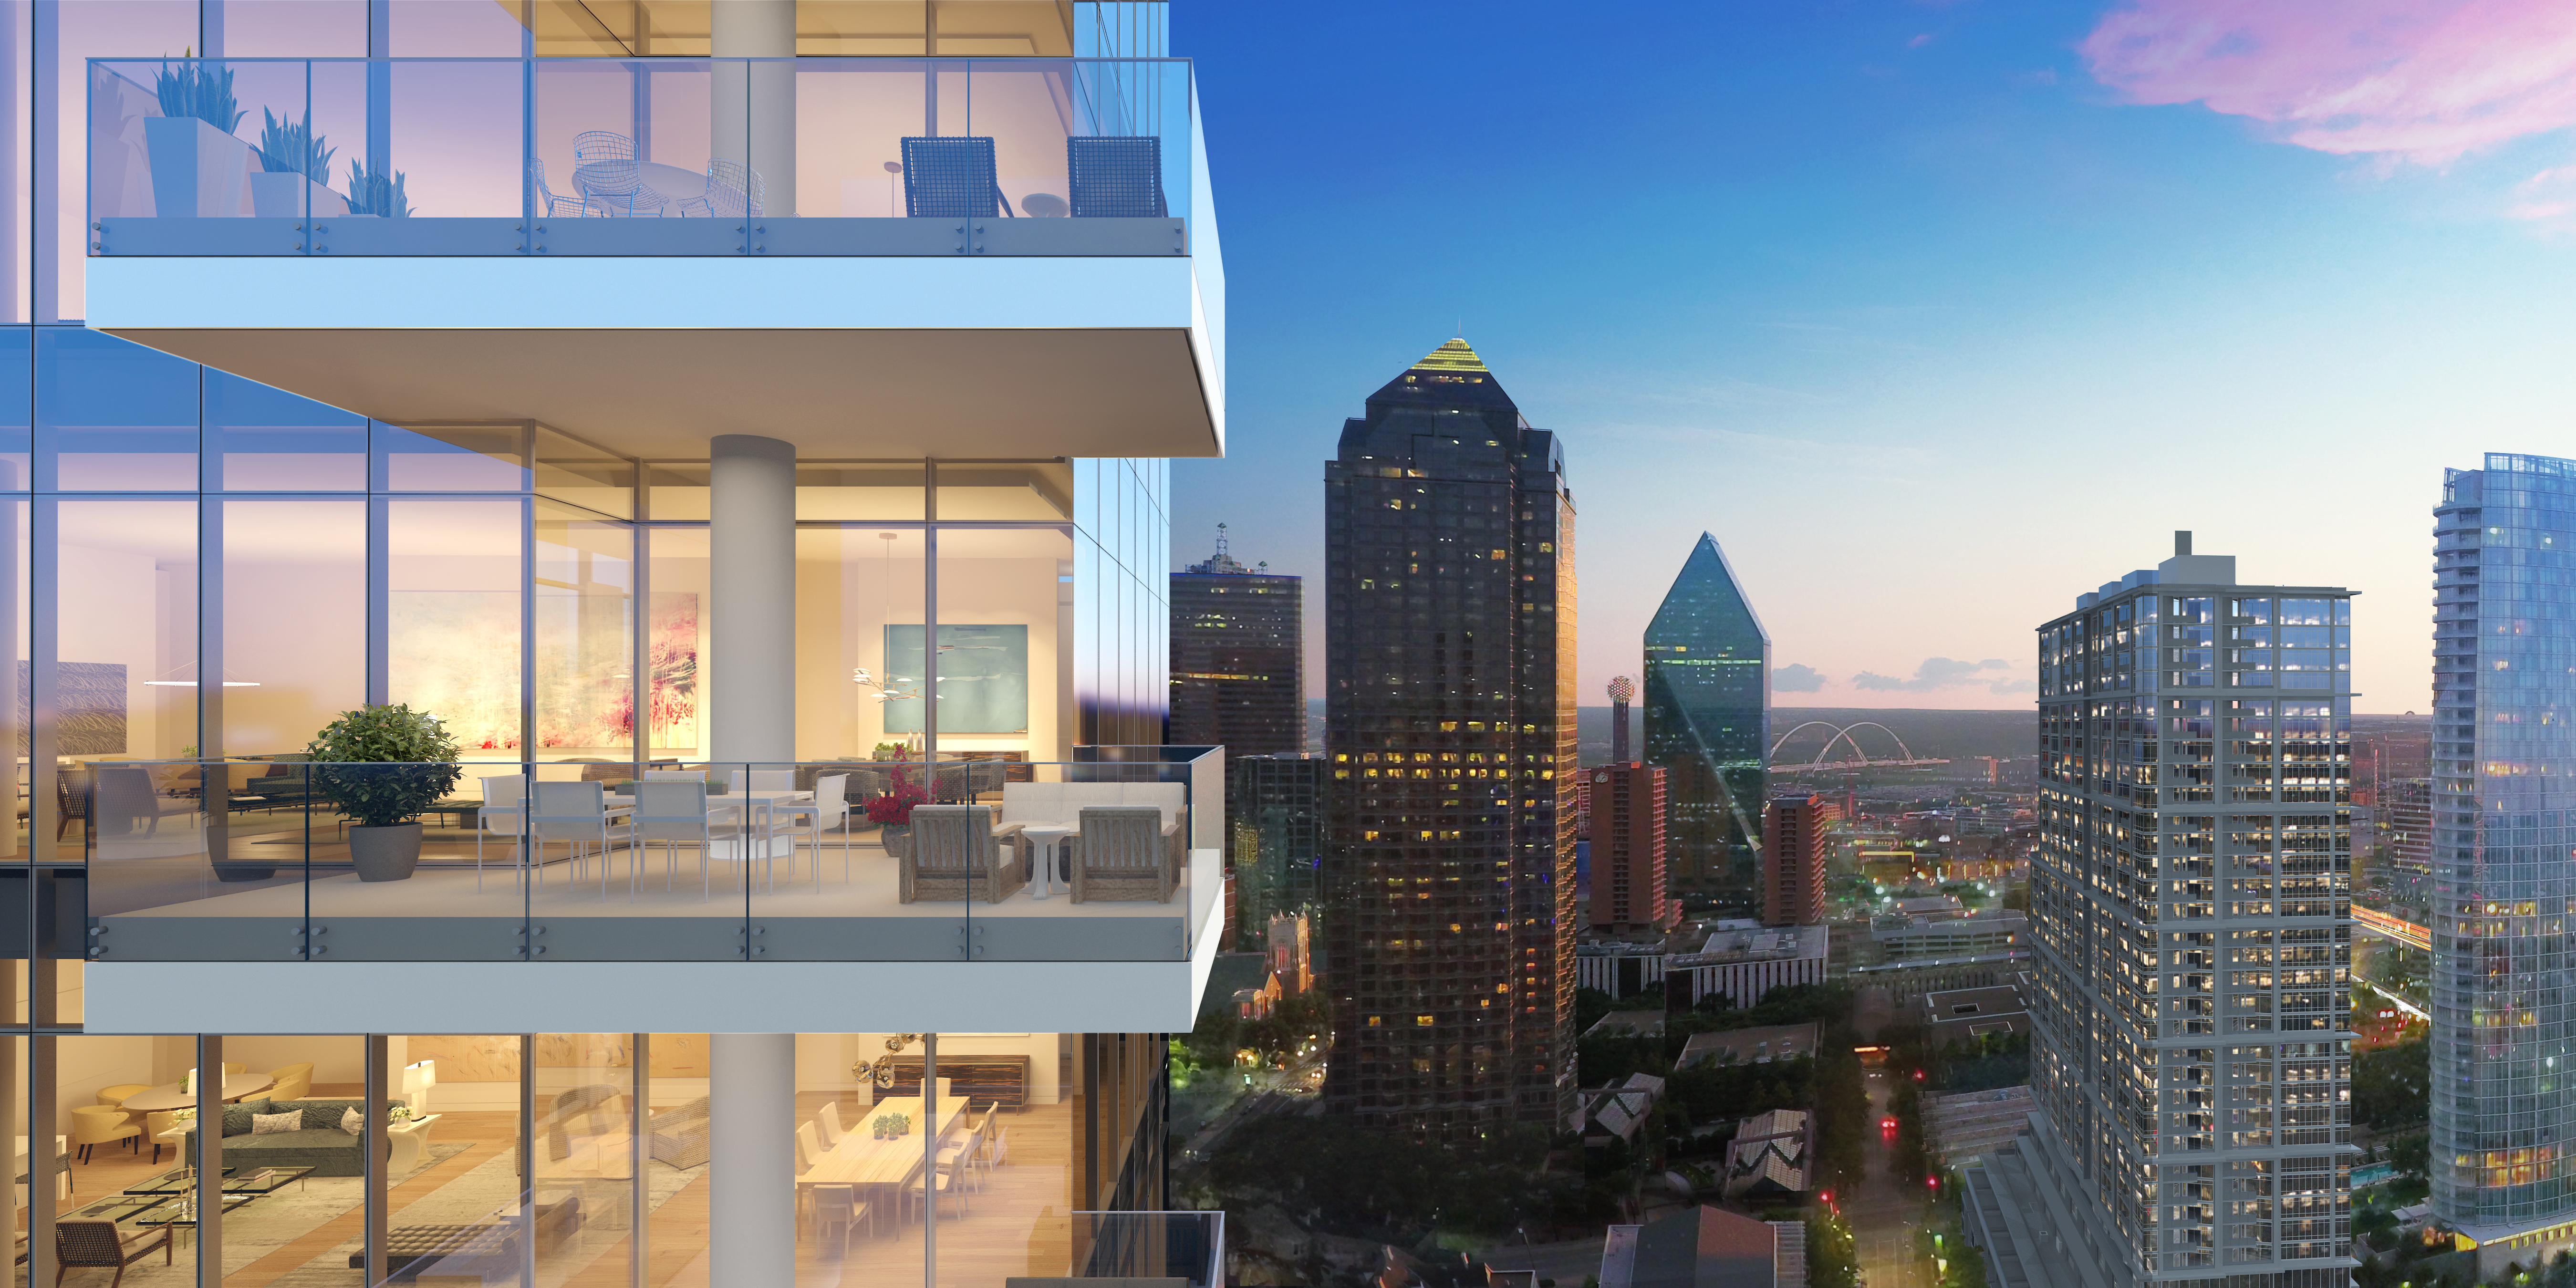 The Residences will offer homes from 1,600 square feet to a two-story 10,000-square-foot penthouse. 